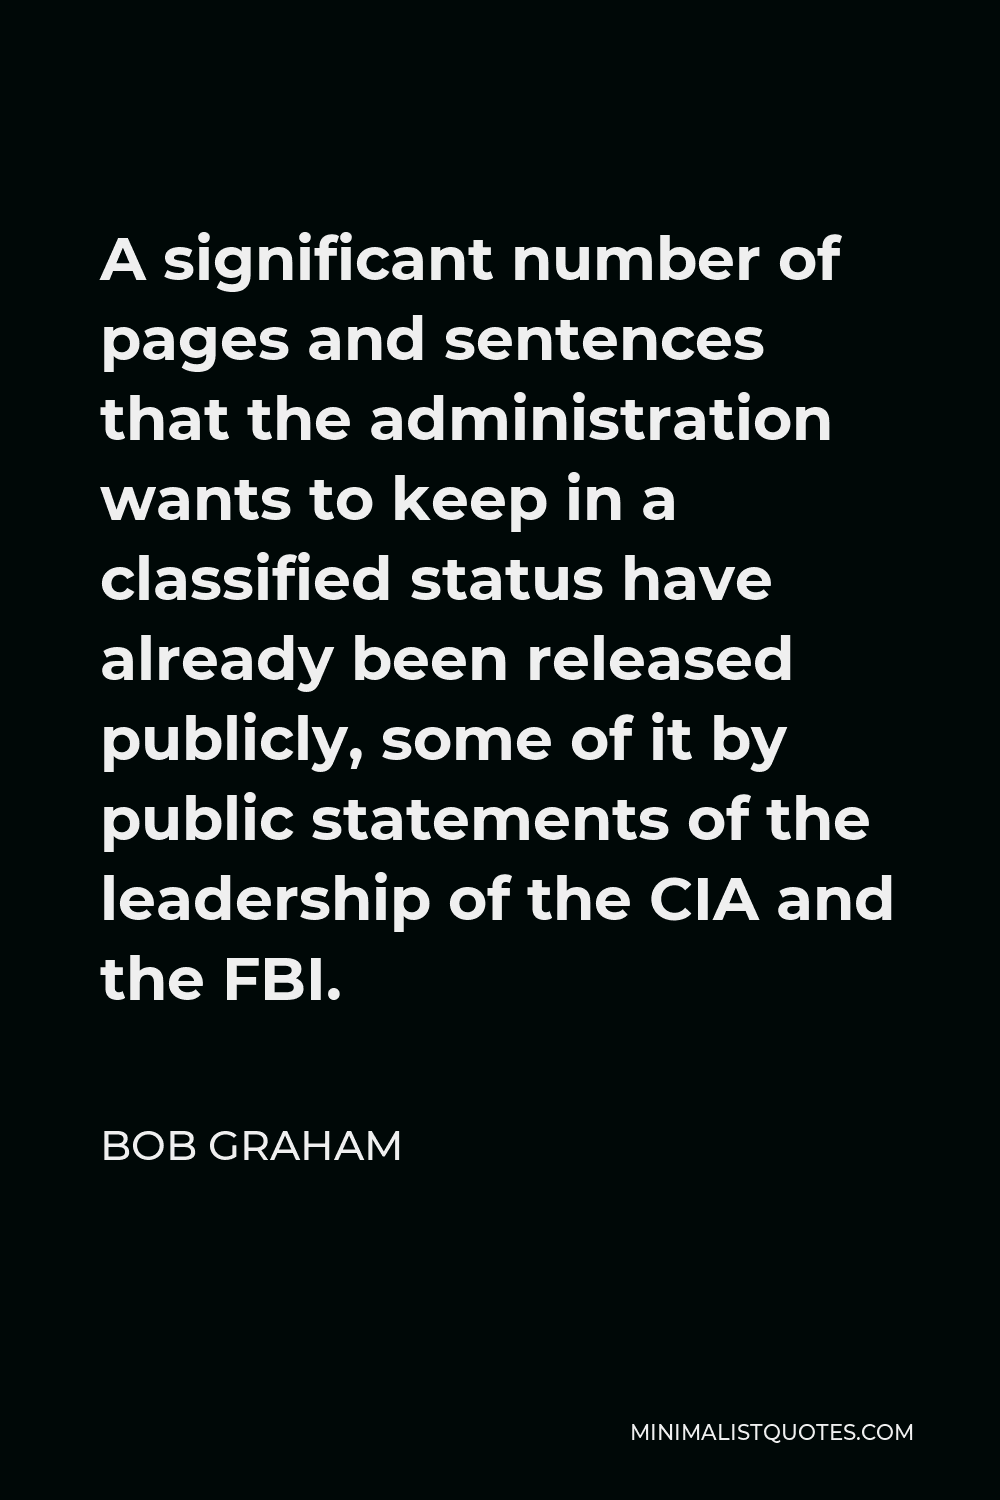 Bob Graham Quote - A significant number of pages and sentences that the administration wants to keep in a classified status have already been released publicly, some of it by public statements of the leadership of the CIA and the FBI.